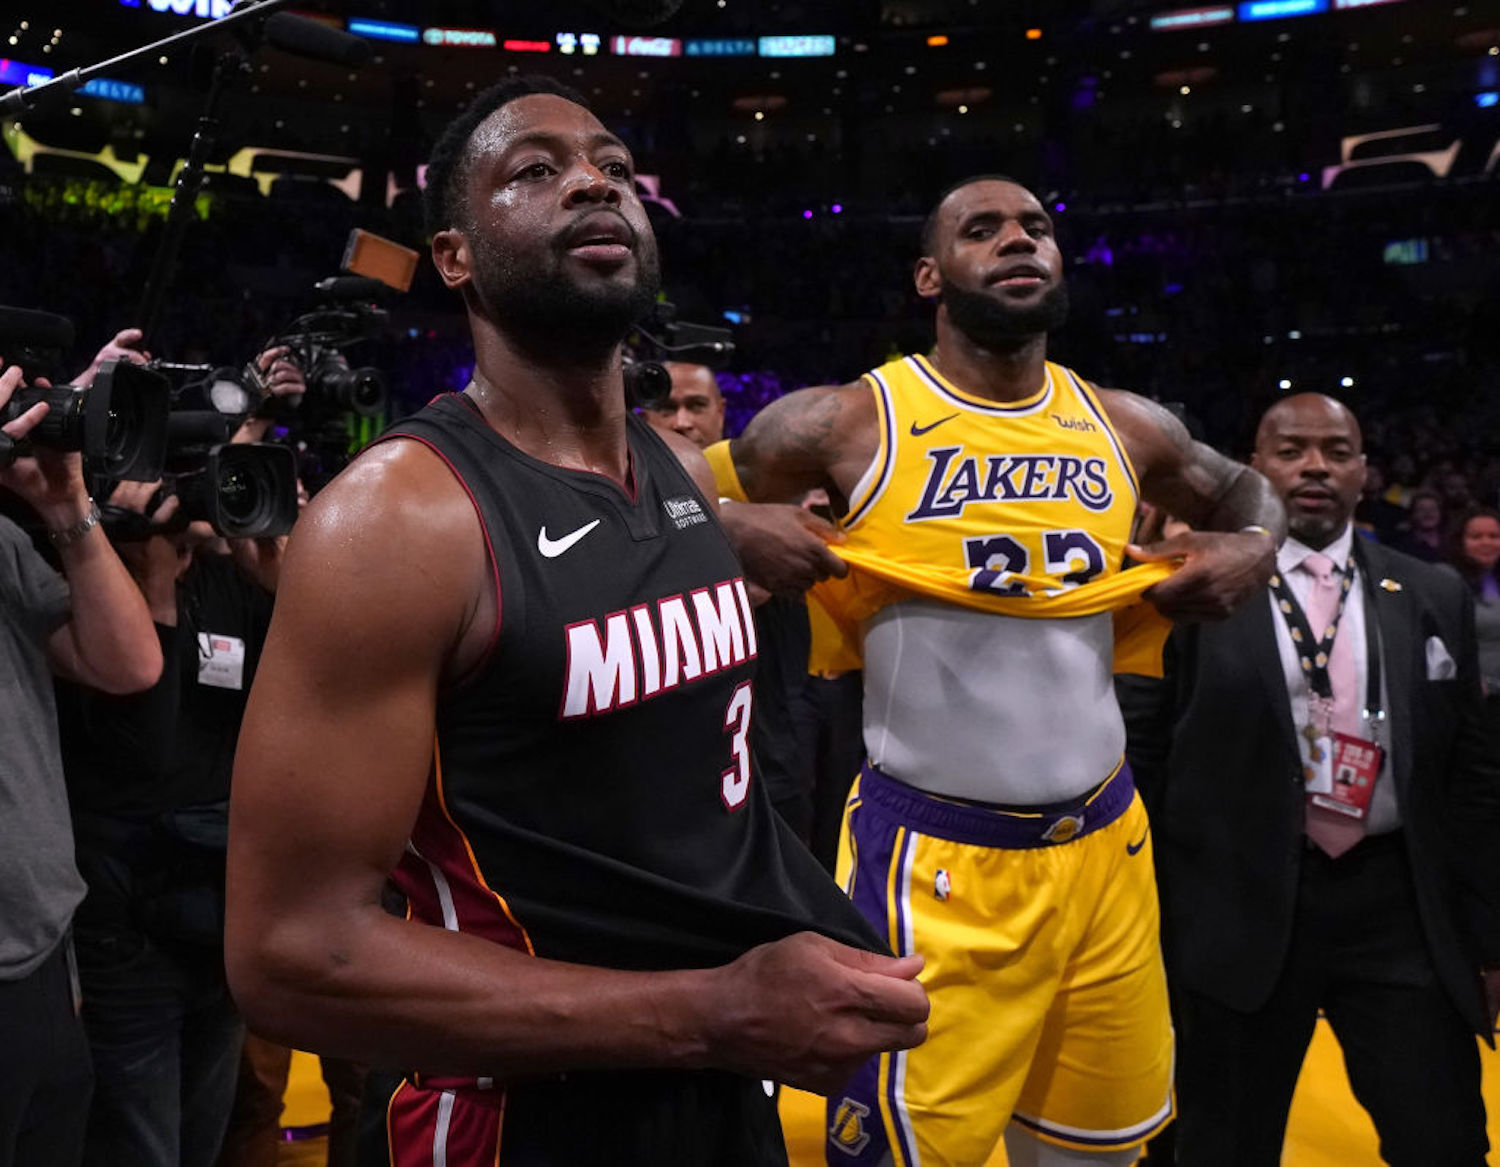 Will Dwayne Wade Be Rooting for His Former Team or His Best Friend in the 2020 NBA Finals?